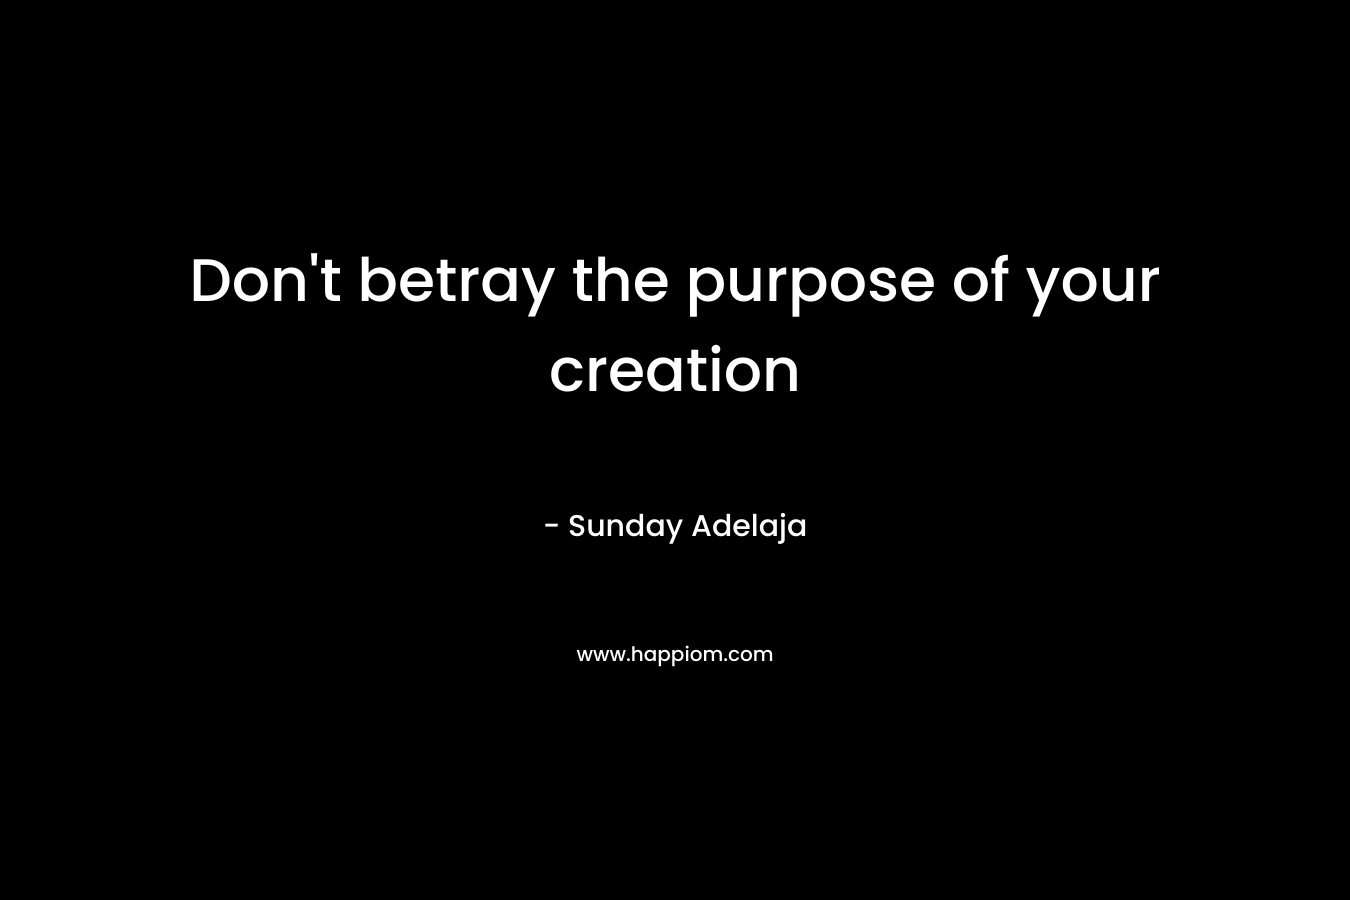 Don't betray the purpose of your creation